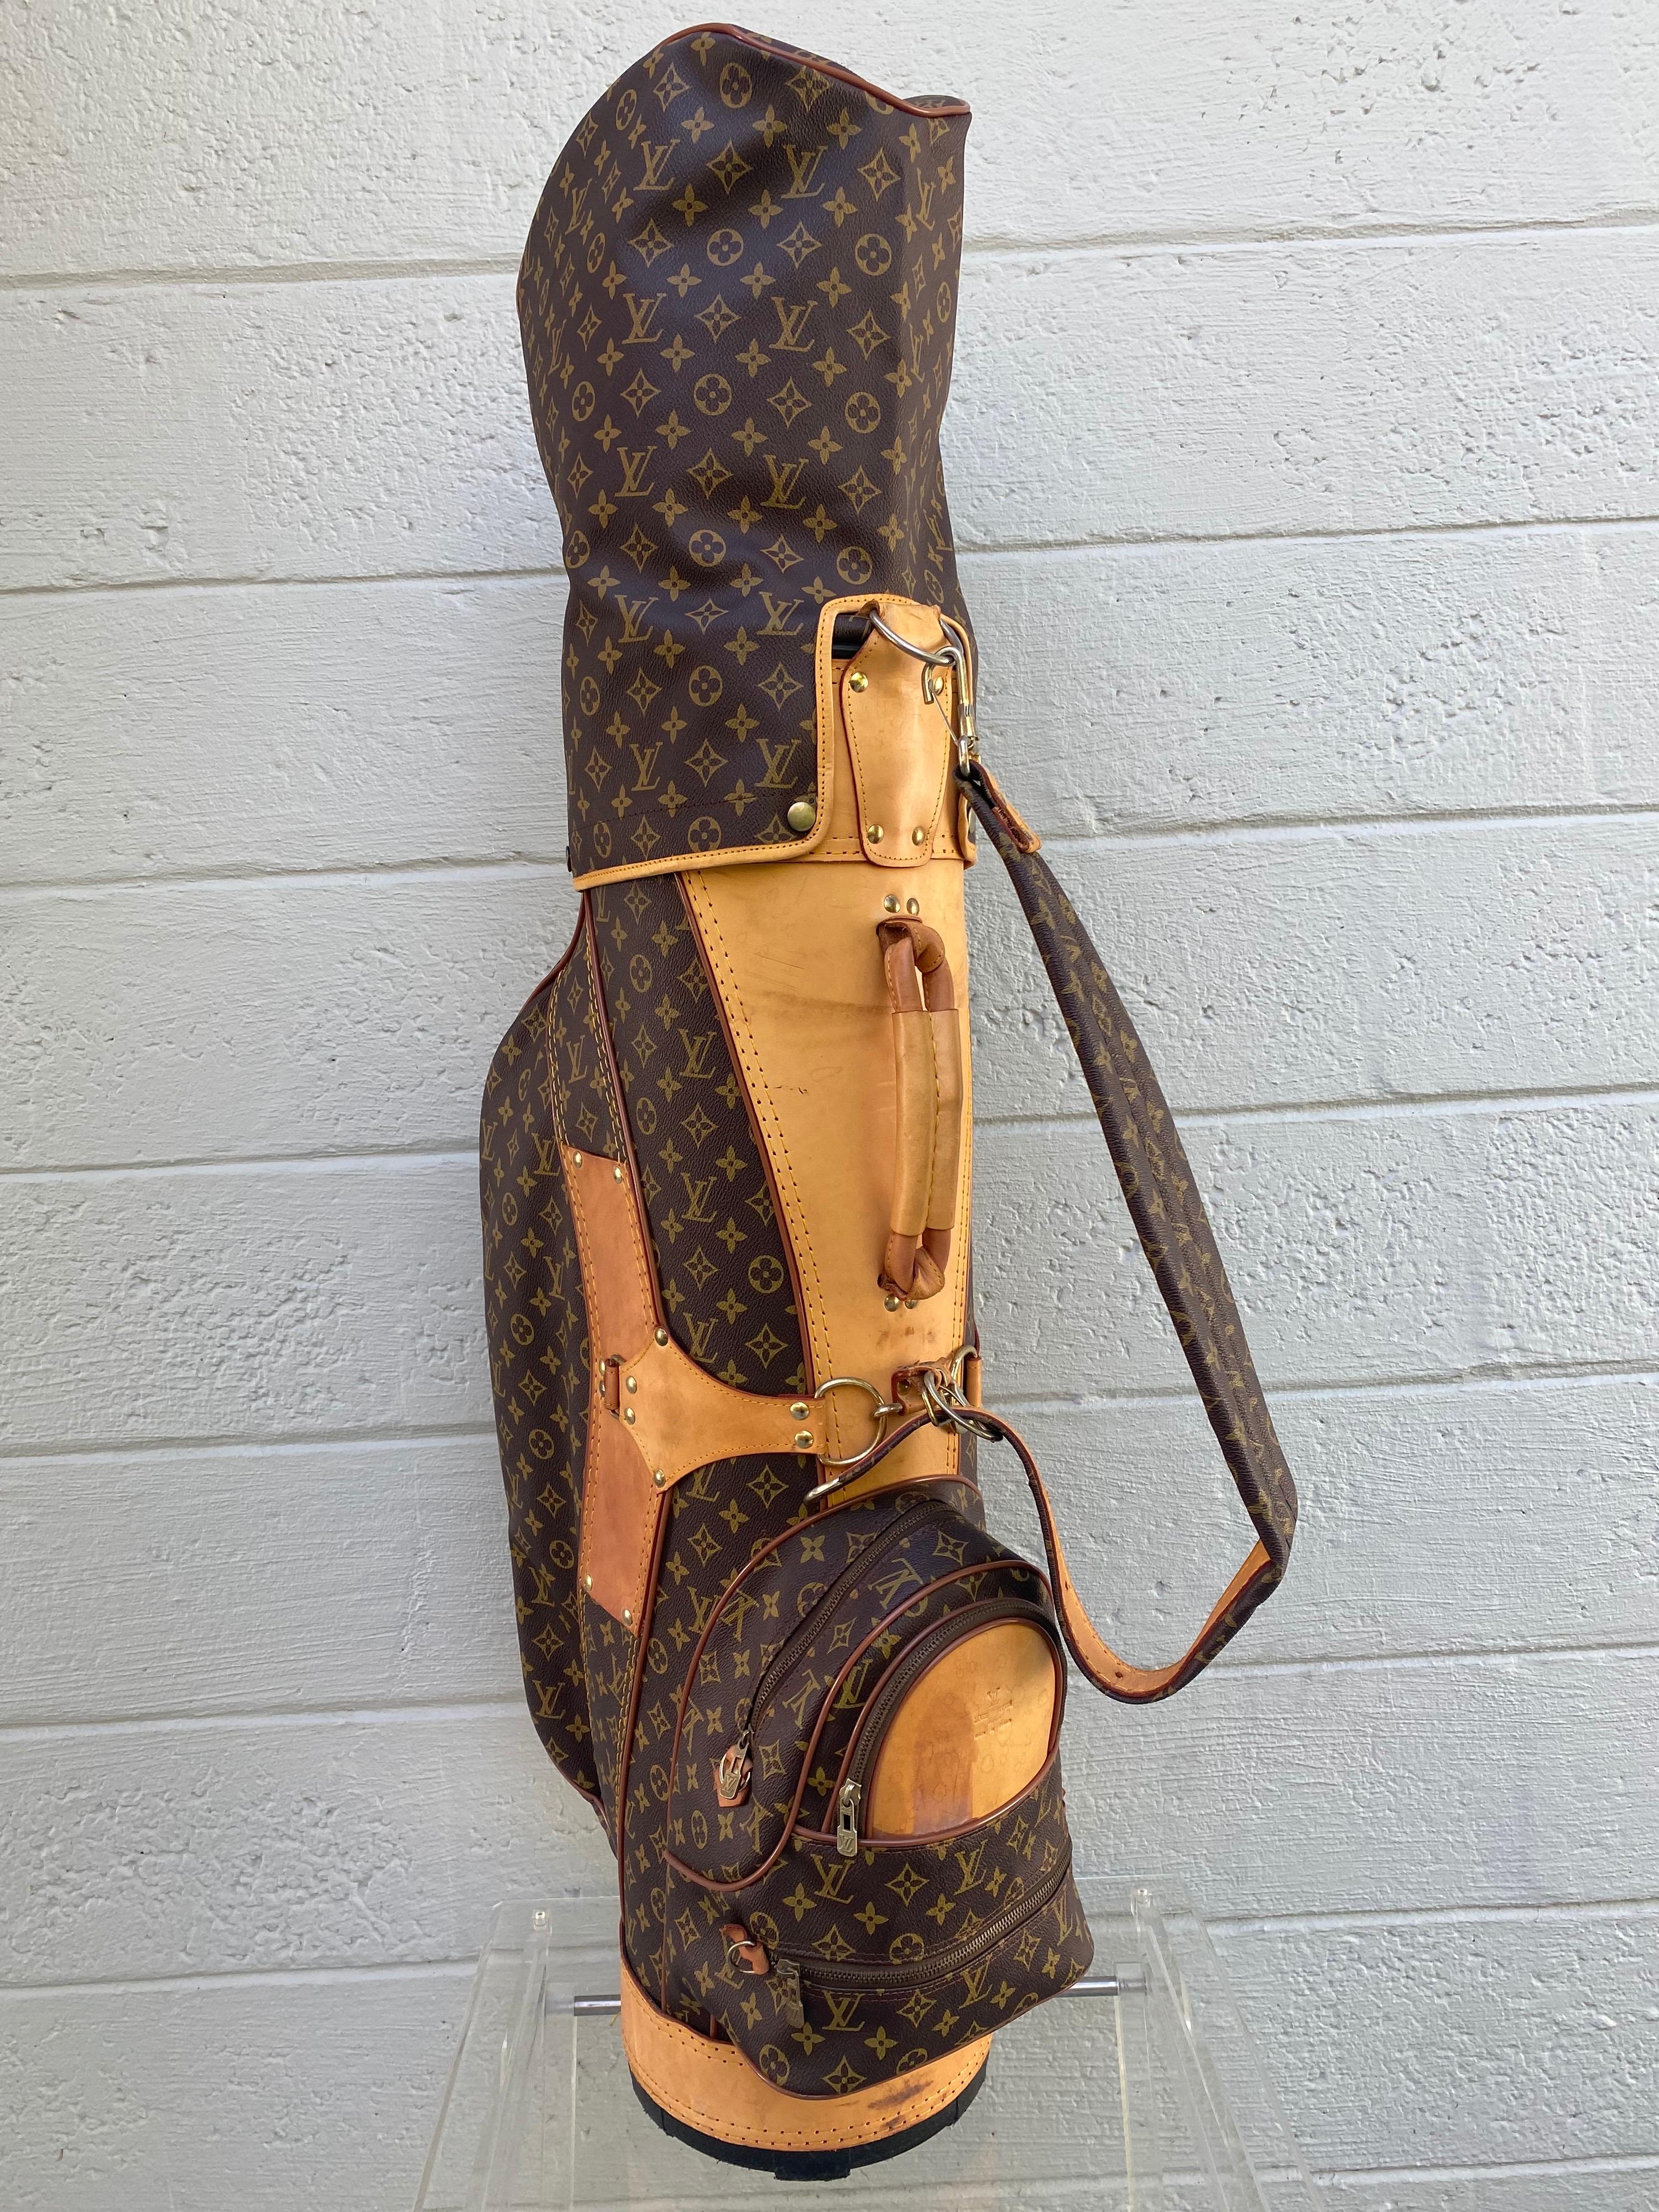 The vintage Louis Vuitton golf bag takes timeless creation to a new level of sophistication and charm. Made from the finest materials that you would expect from the Louis Vuitton House. When not in use for your golf travels, it would make a